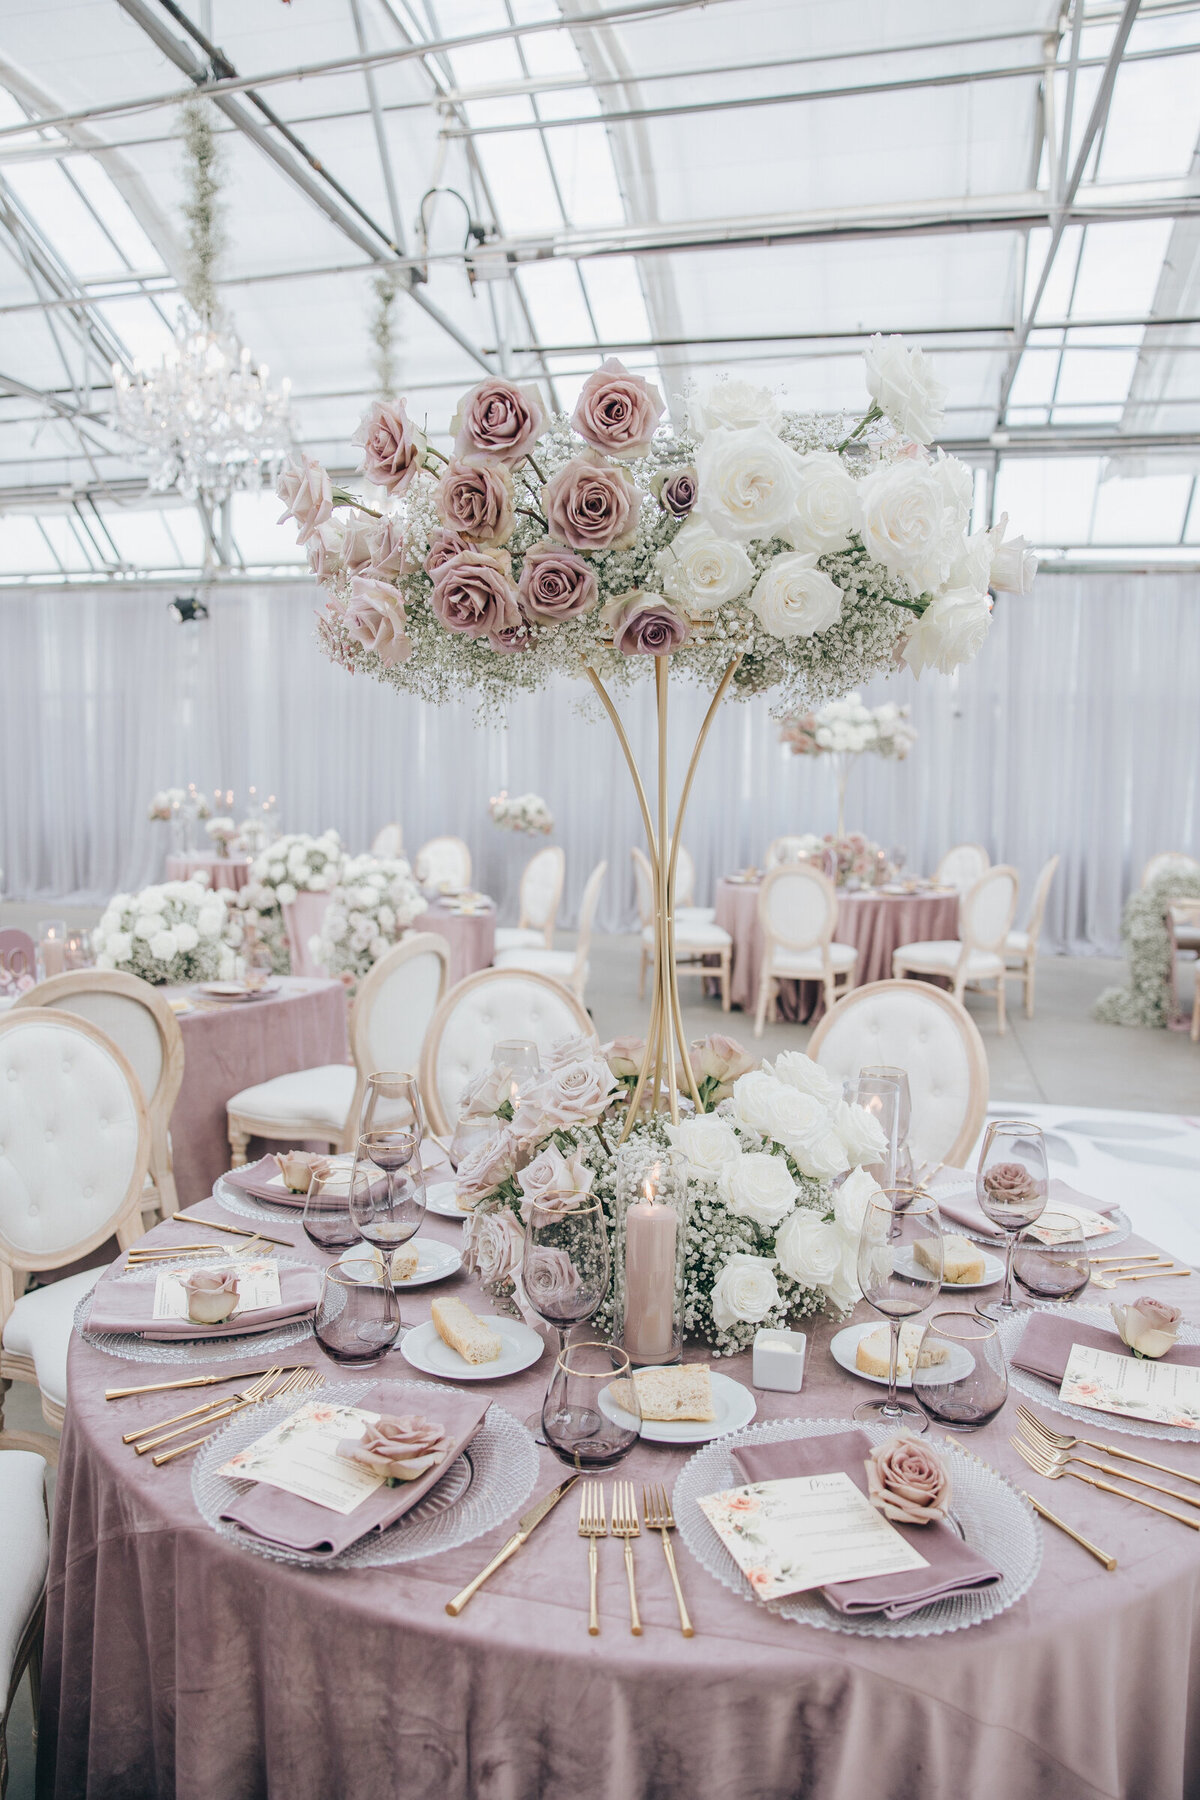 Luxurious dinner decor with gold cutlery, crystal plates, and lavender table cloths